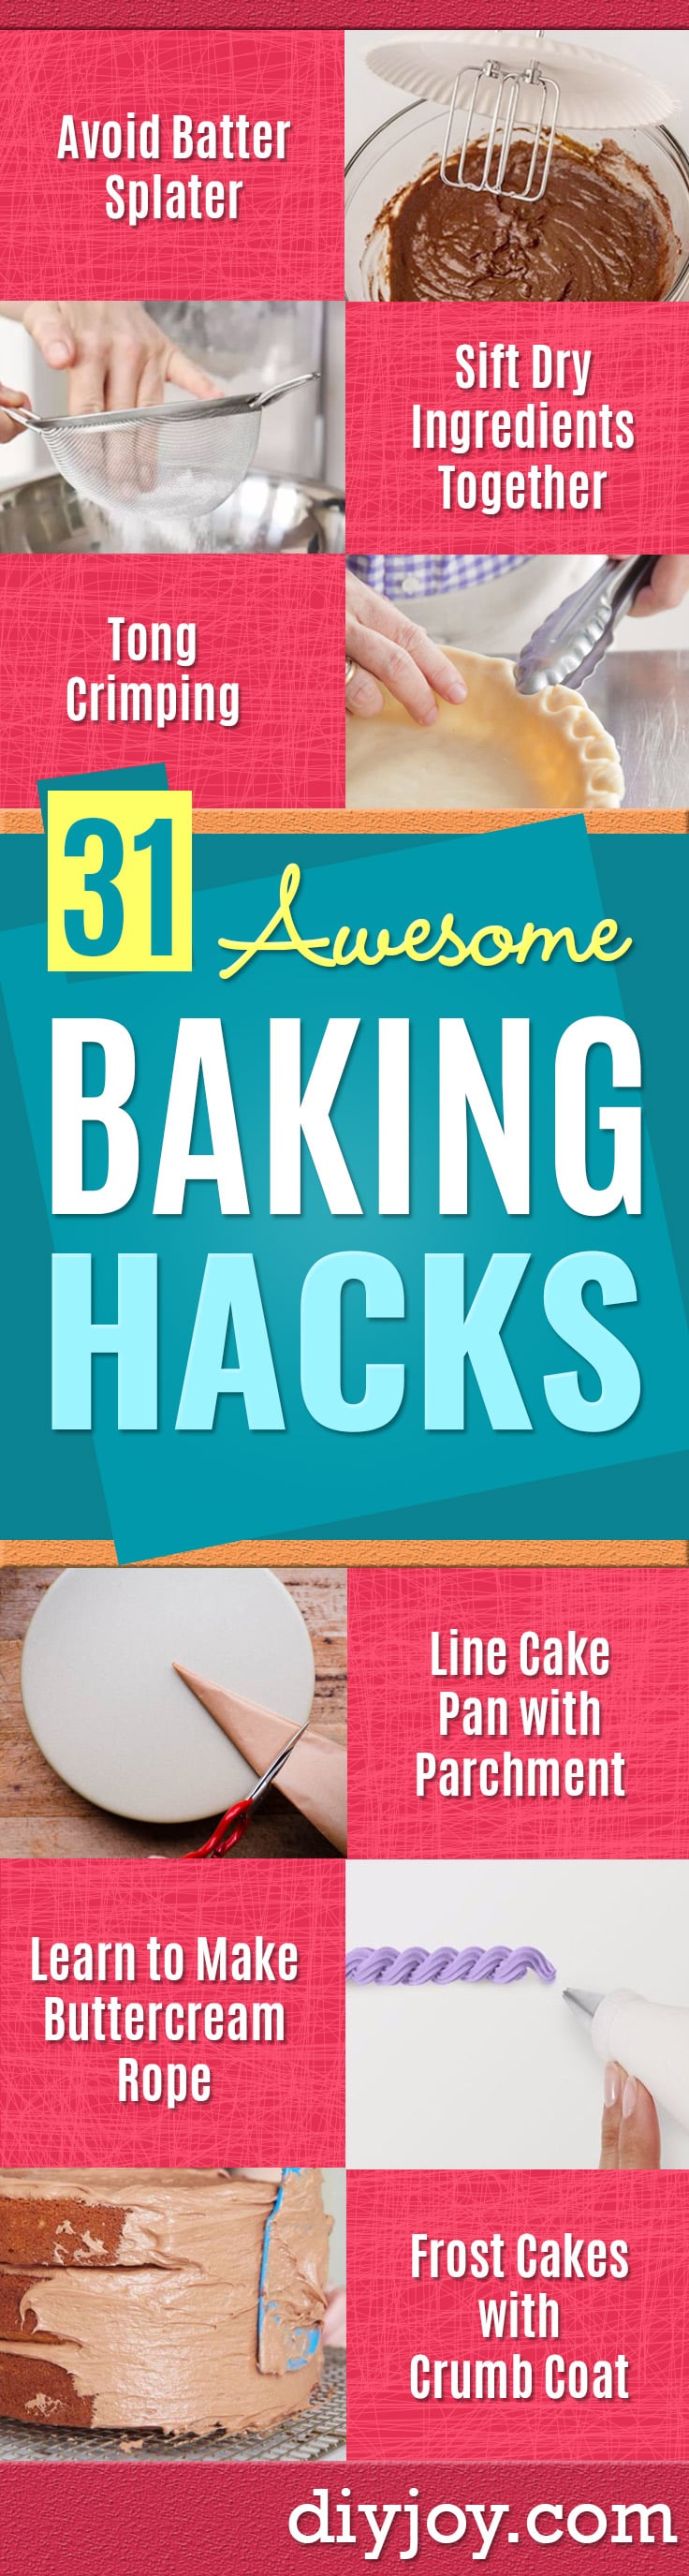 Baking Hacks - A List of Easy Hacks For Your Favorite Baking Recipes - Simple Tips and Tricks To Use When You Bake - Quick Ways to Bake Cake, Cupcakes, Desserts and Cookies - Best Kitchen Lifehacks for Bakers Favorite DIY Recipe